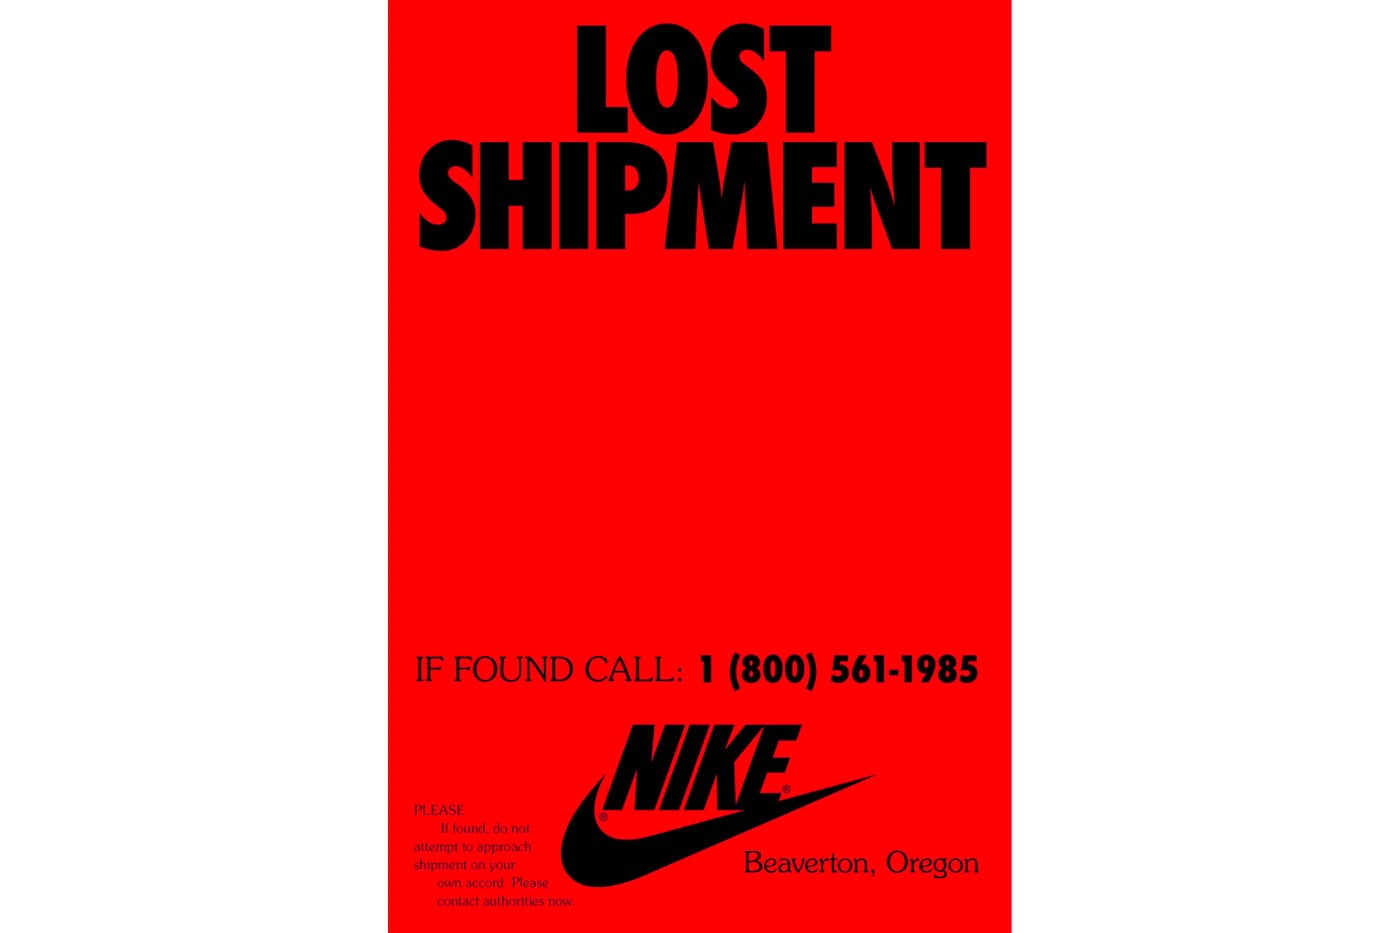 Nike 1985 Lost Shipment Campaign Launch 